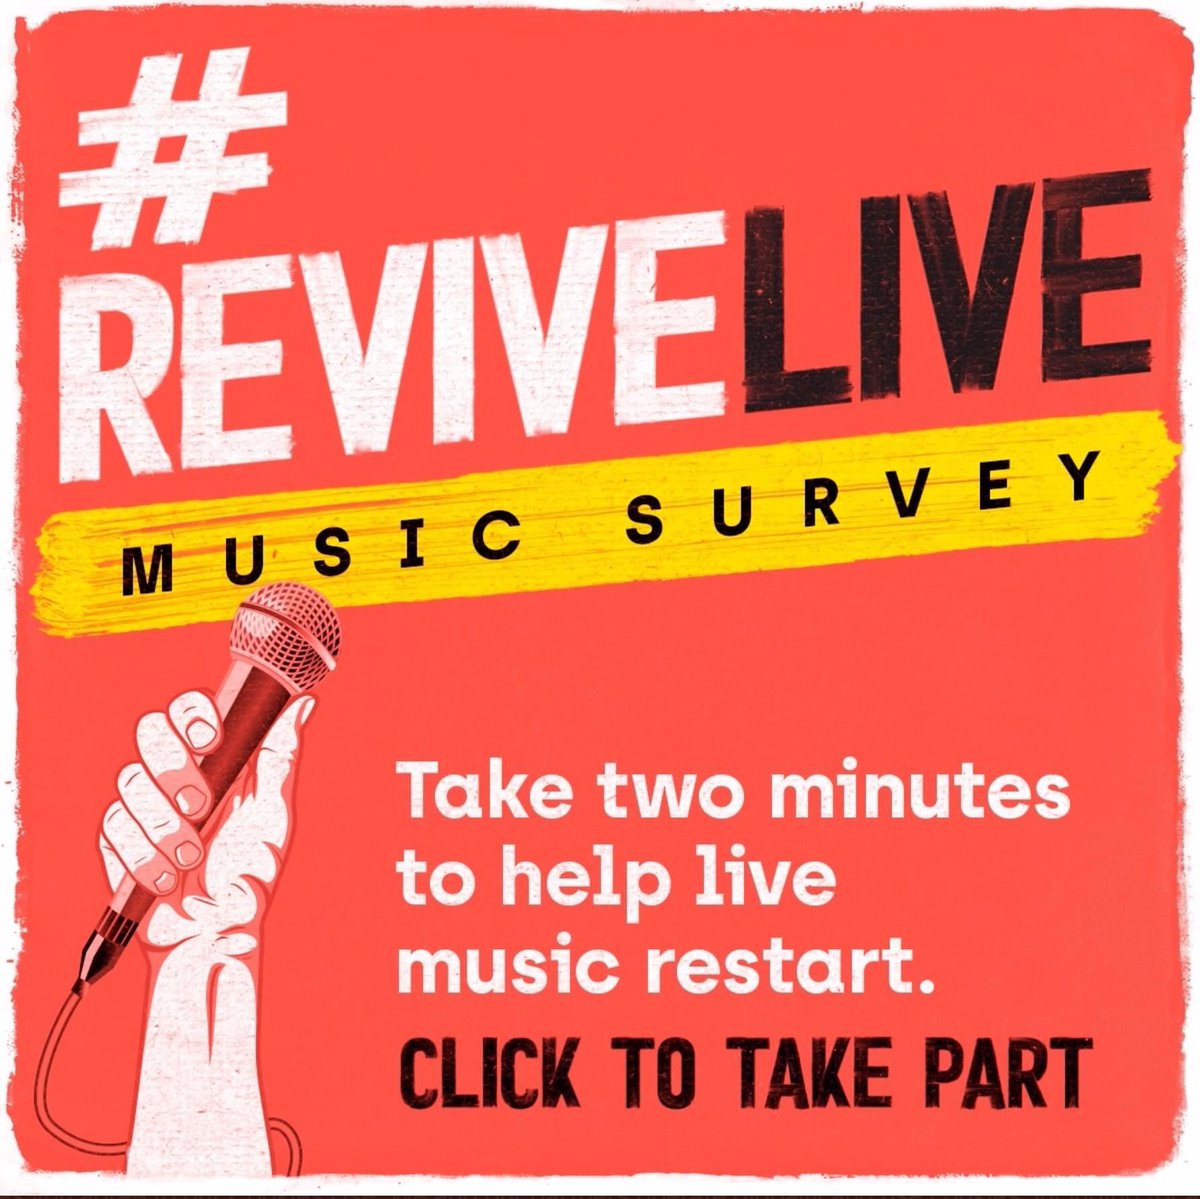 via @musicvenuetrust - time to start the work required to #ReviveLive ..... The Revive Live Audience Survey is live NOW.  

Take Part: surveymonkey.co.uk/r/QYCQ9JX
It takes 2 minutes of your time

@HelpMusiciansUK @AIM_UK @WeMakeEventsoff #saveourvenues @WeAreViableUK @IVW_UK